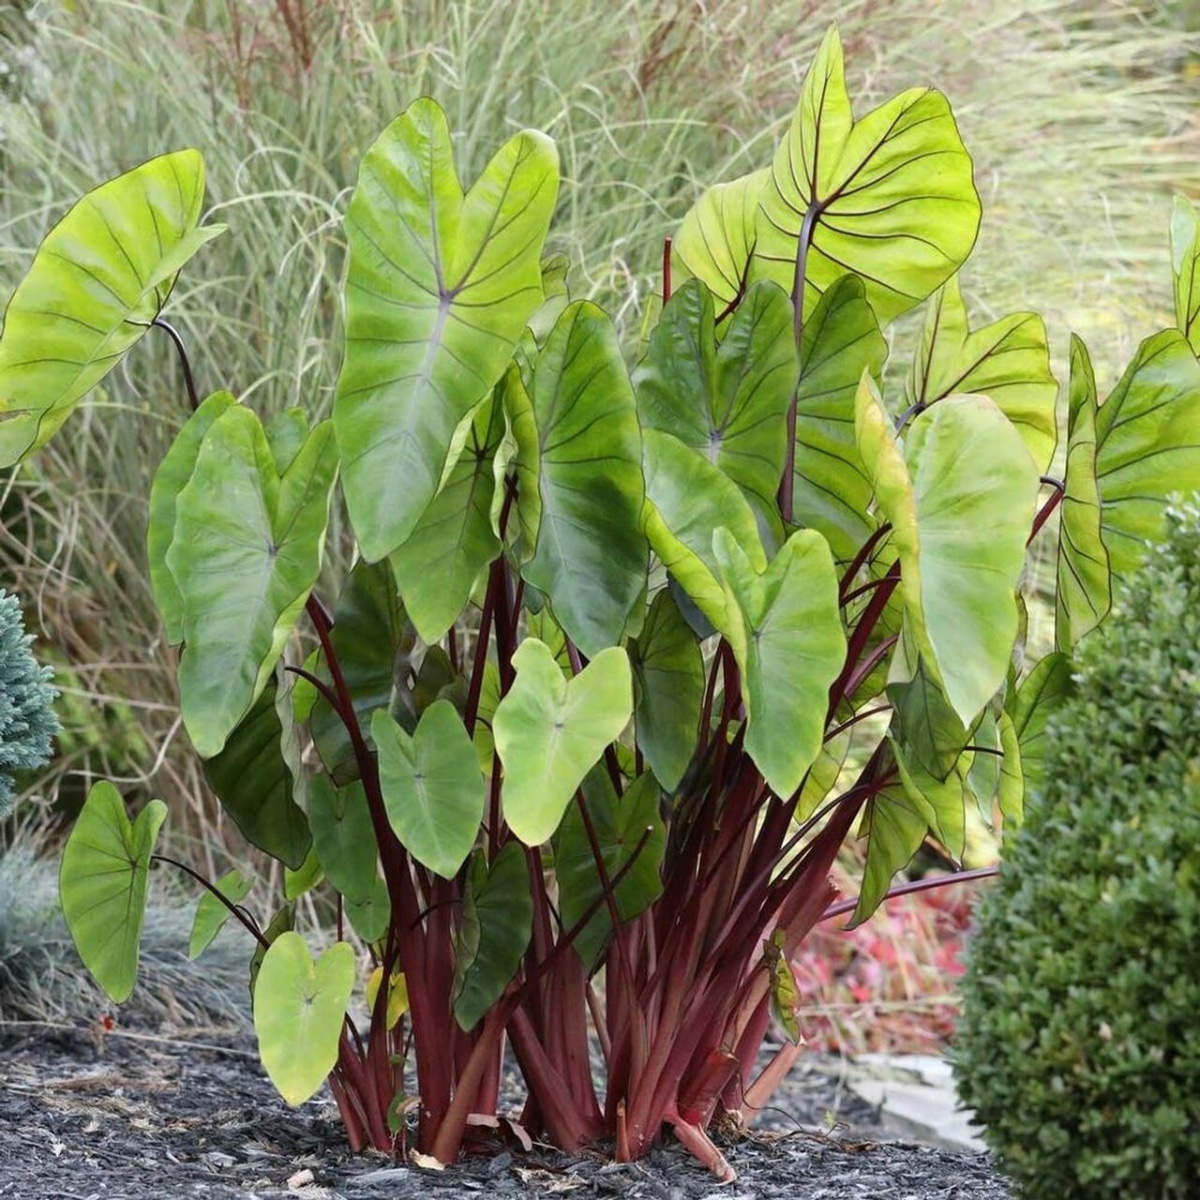 The Colocasia Hawaiian Punch has red stems